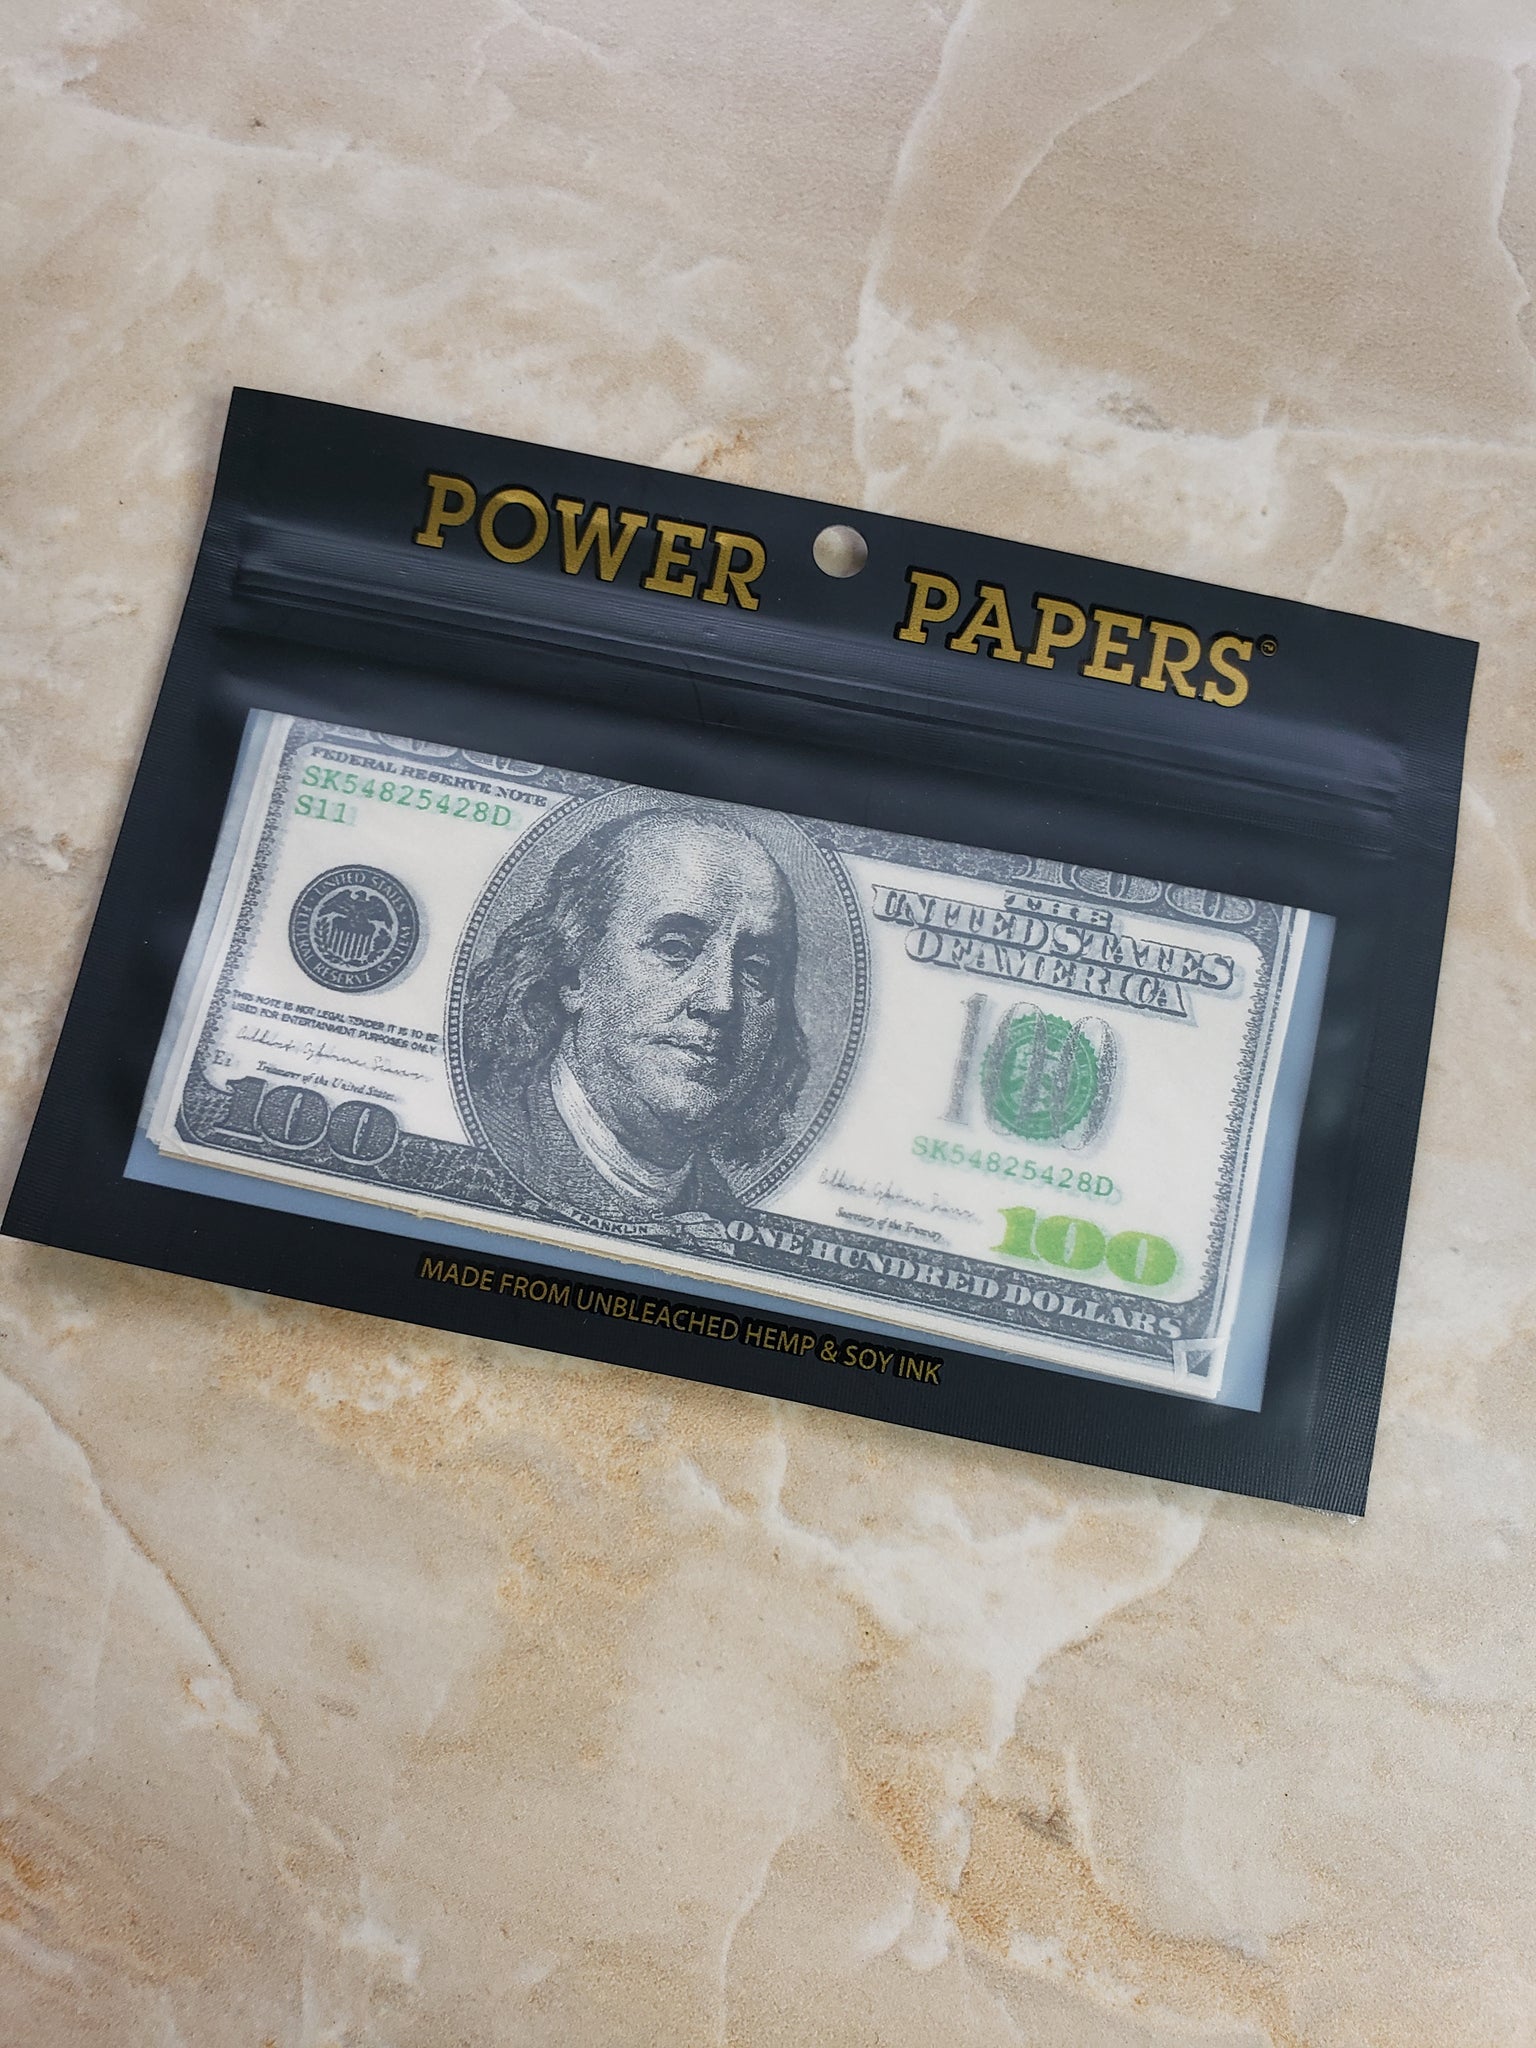 Channel CRXWN | POWER Papers Classic USD 100 Bill Rolling Papers Plus Free Gold Bullion Mini Lighter 420*24/7*365 Big Bank Manifest